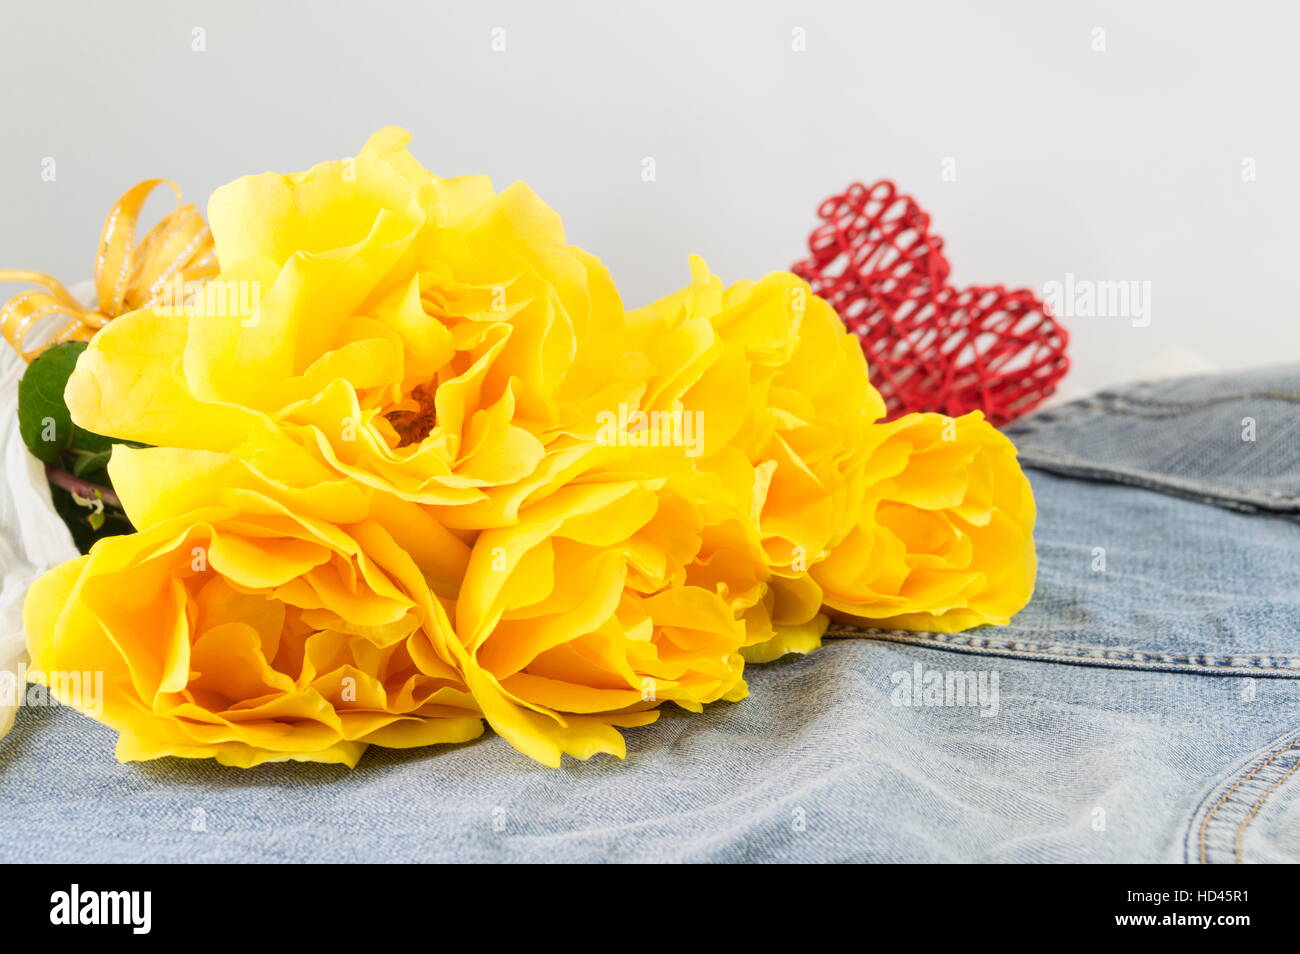 Yellow roses in full blossom placed on denim jeans Stock Photo